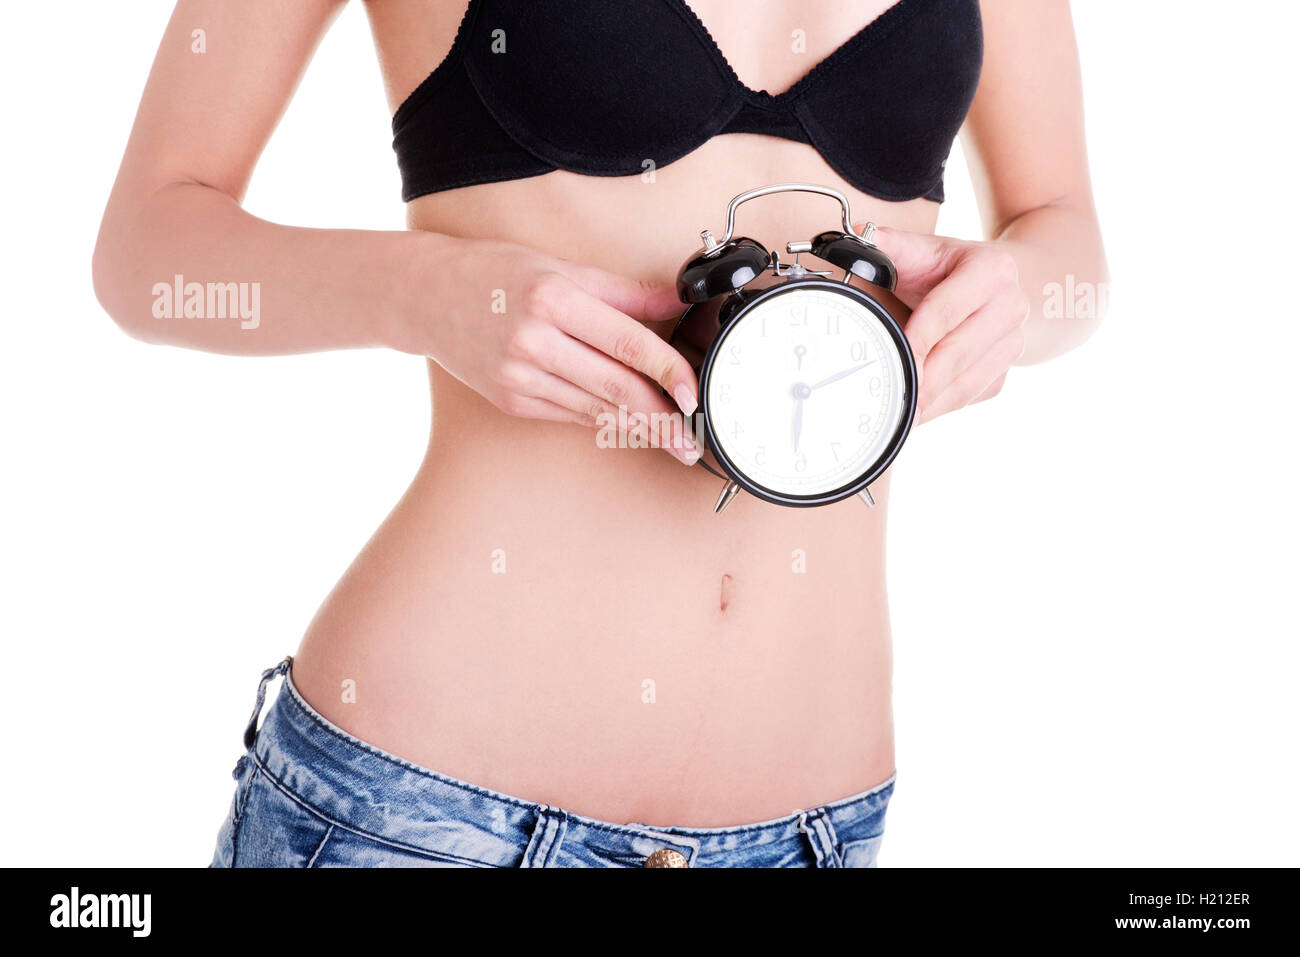 Beautiful fit woman with clock on belly Stock Photo